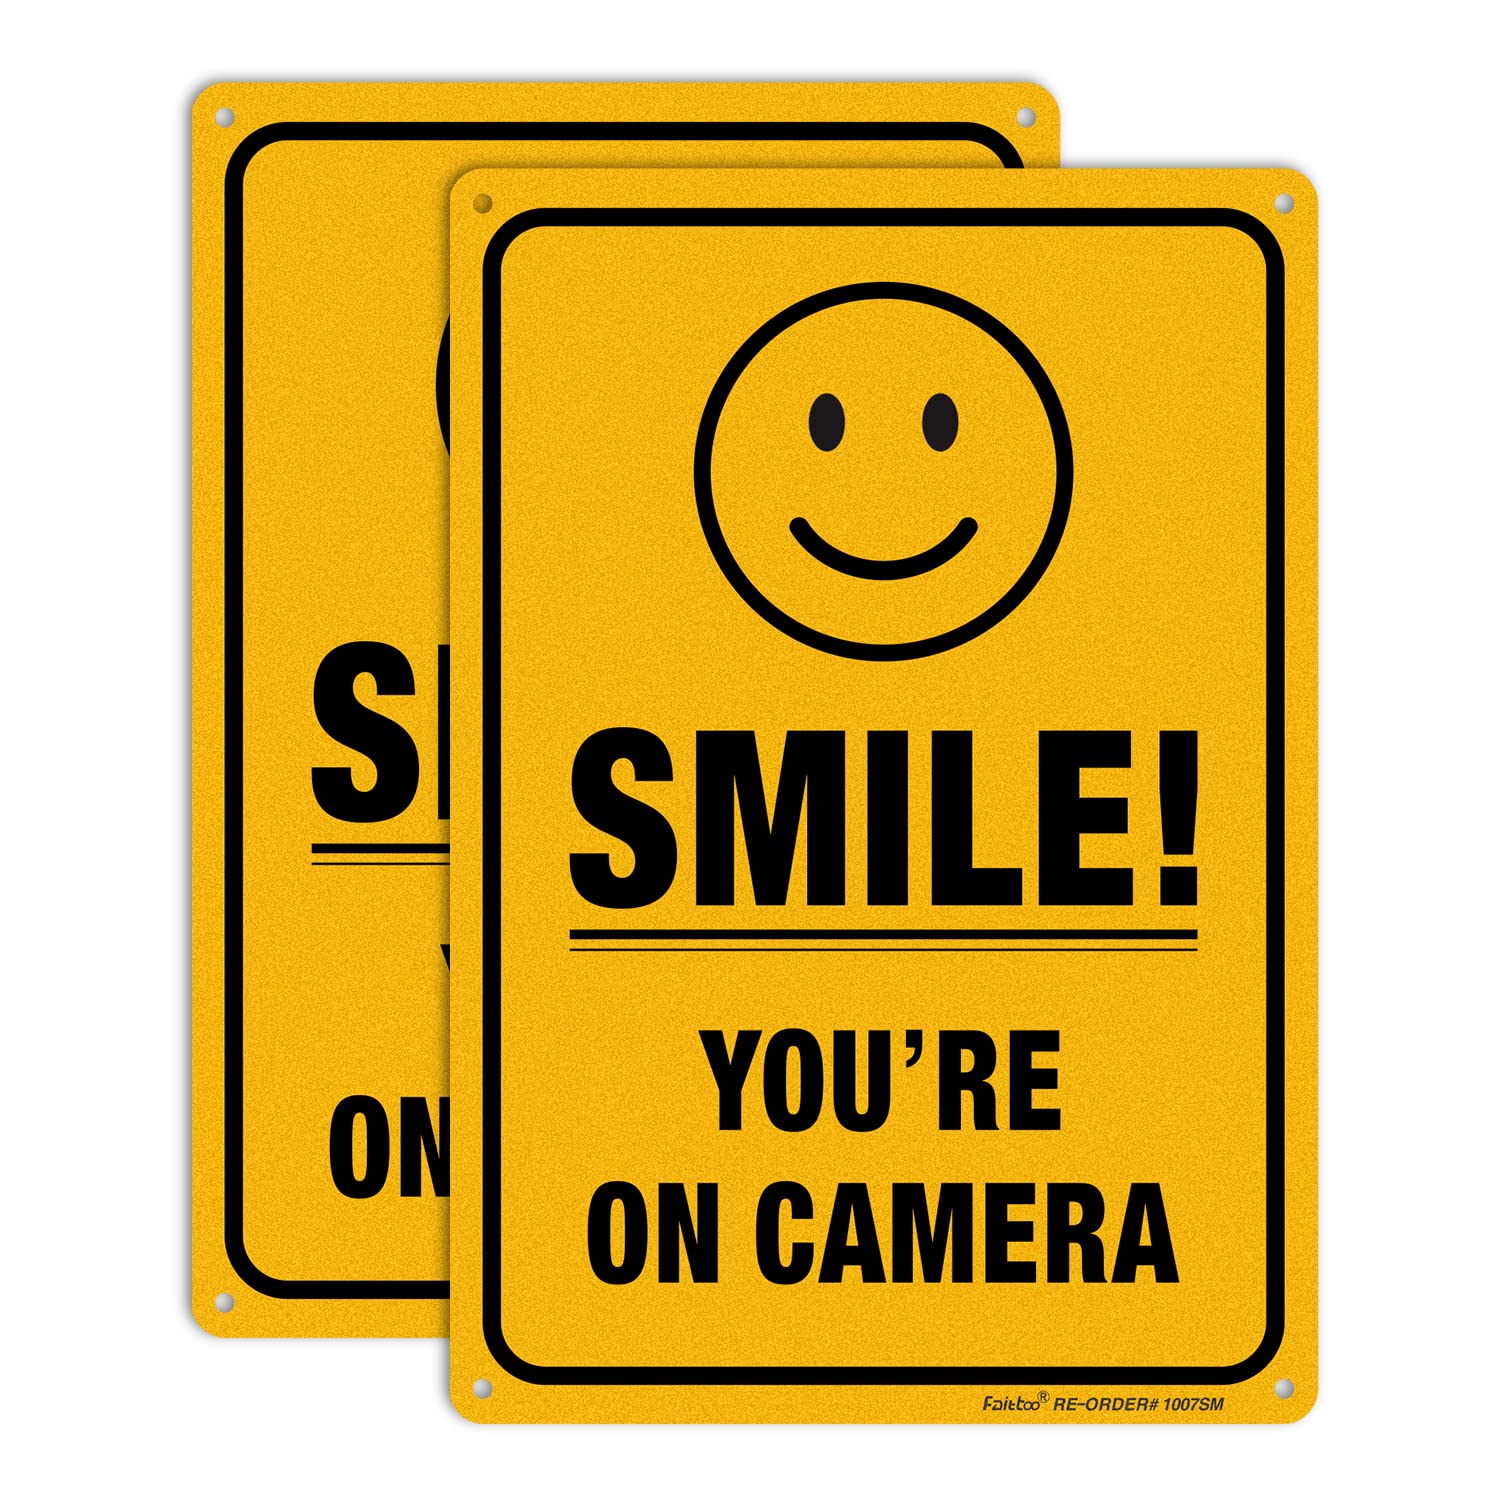 (2 Pack) Smile You're On Camera Video Surveillance Sign - 10 x7 Inches .040 Rust Free Heavy Duty Aluminum - Indoor or Outdoor Use for Home Business CCTV Security Camera,UV Protected & Reflective